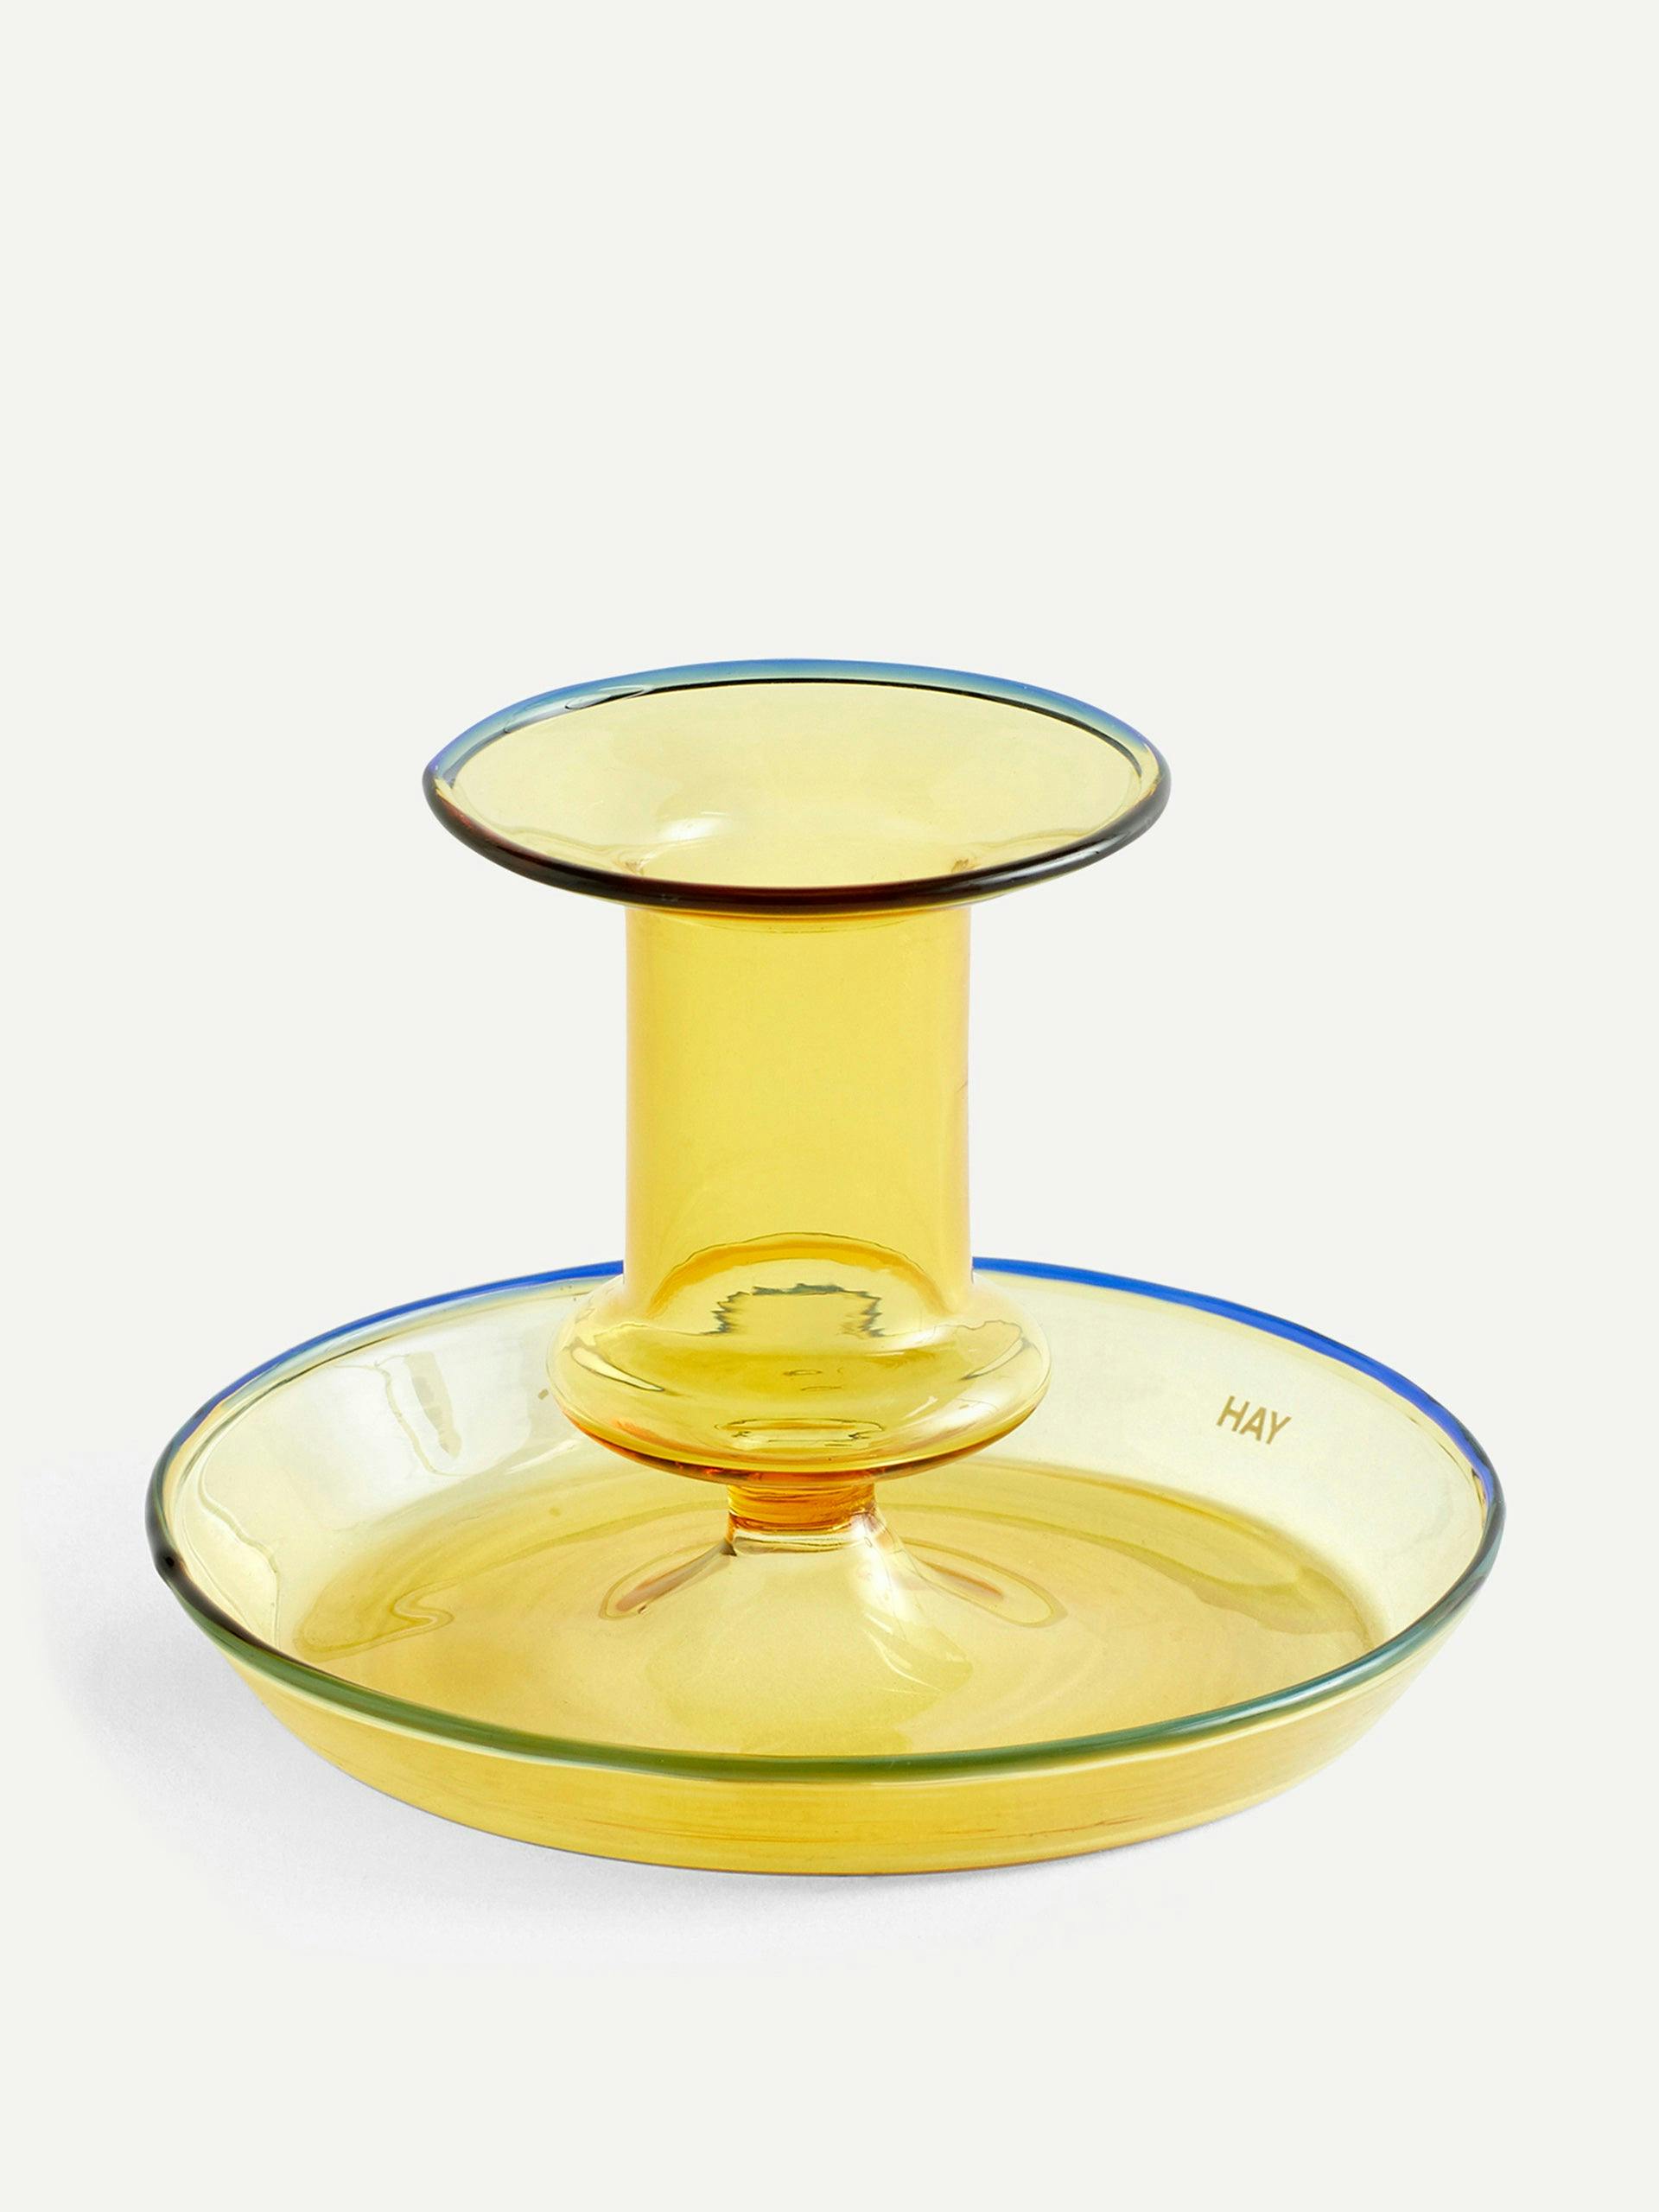 Flare glass yellow candle holder with blue rimming